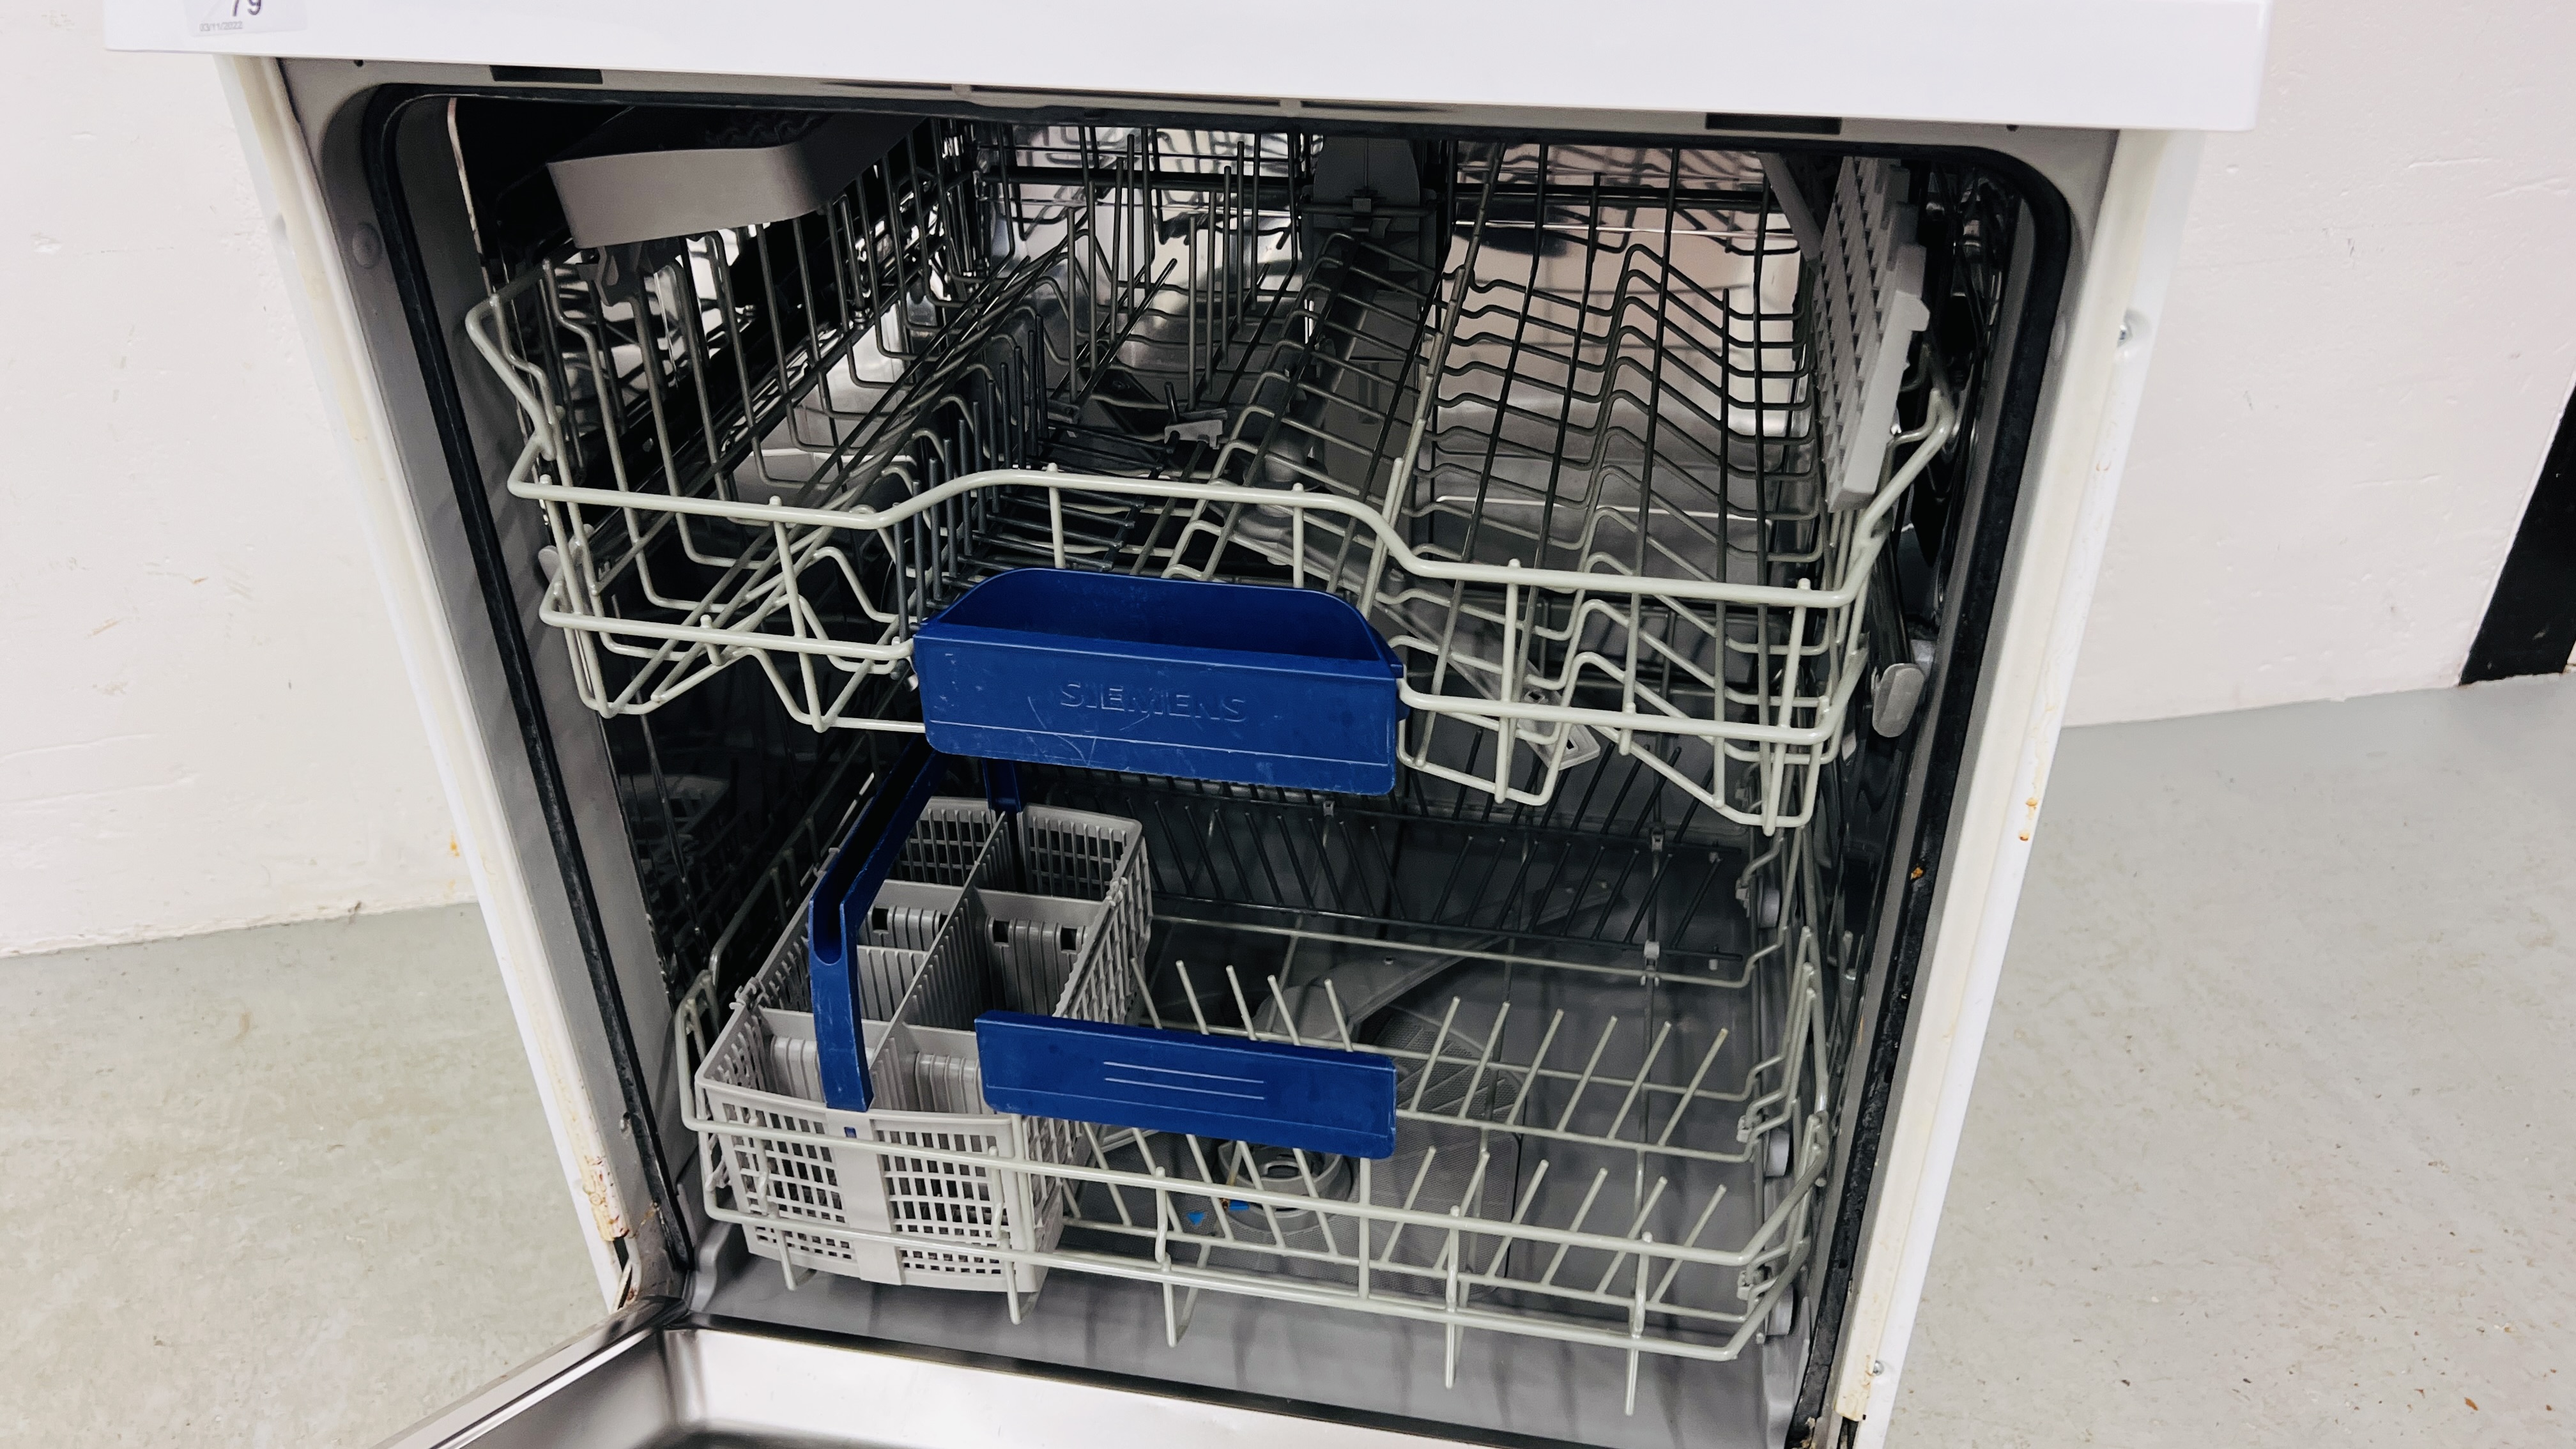 SIEMENS iQ100 DISHWASHER - SOLD AS SEEN - Image 7 of 8